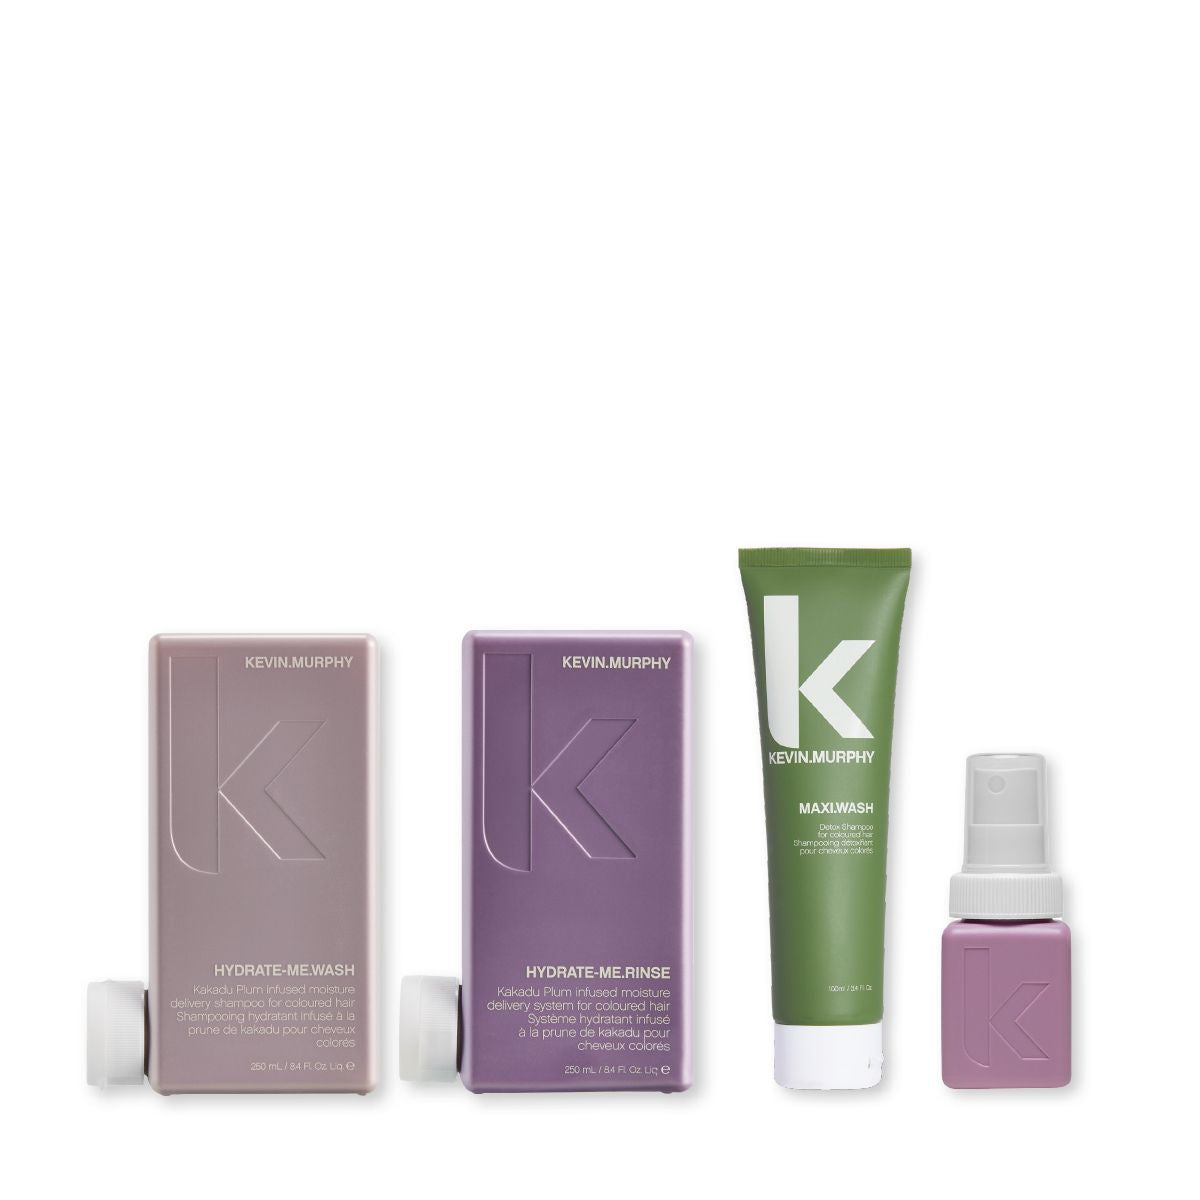 Kevin Murphy Hydrate Me & Travel